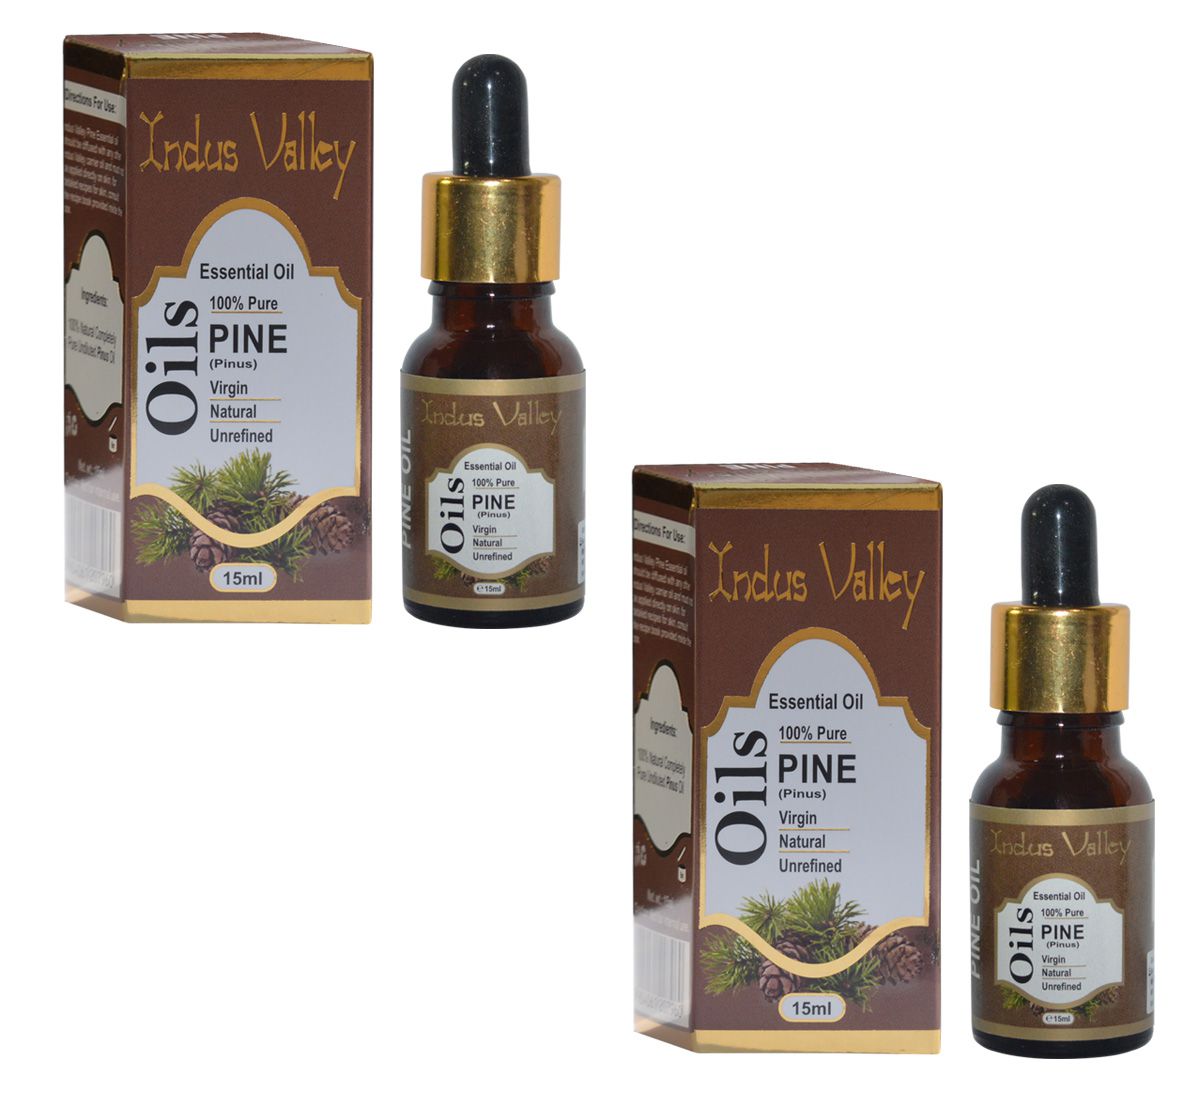     			Indus Valley 100% Pure Pine Essential Oil - Twin Pack (30 ml)